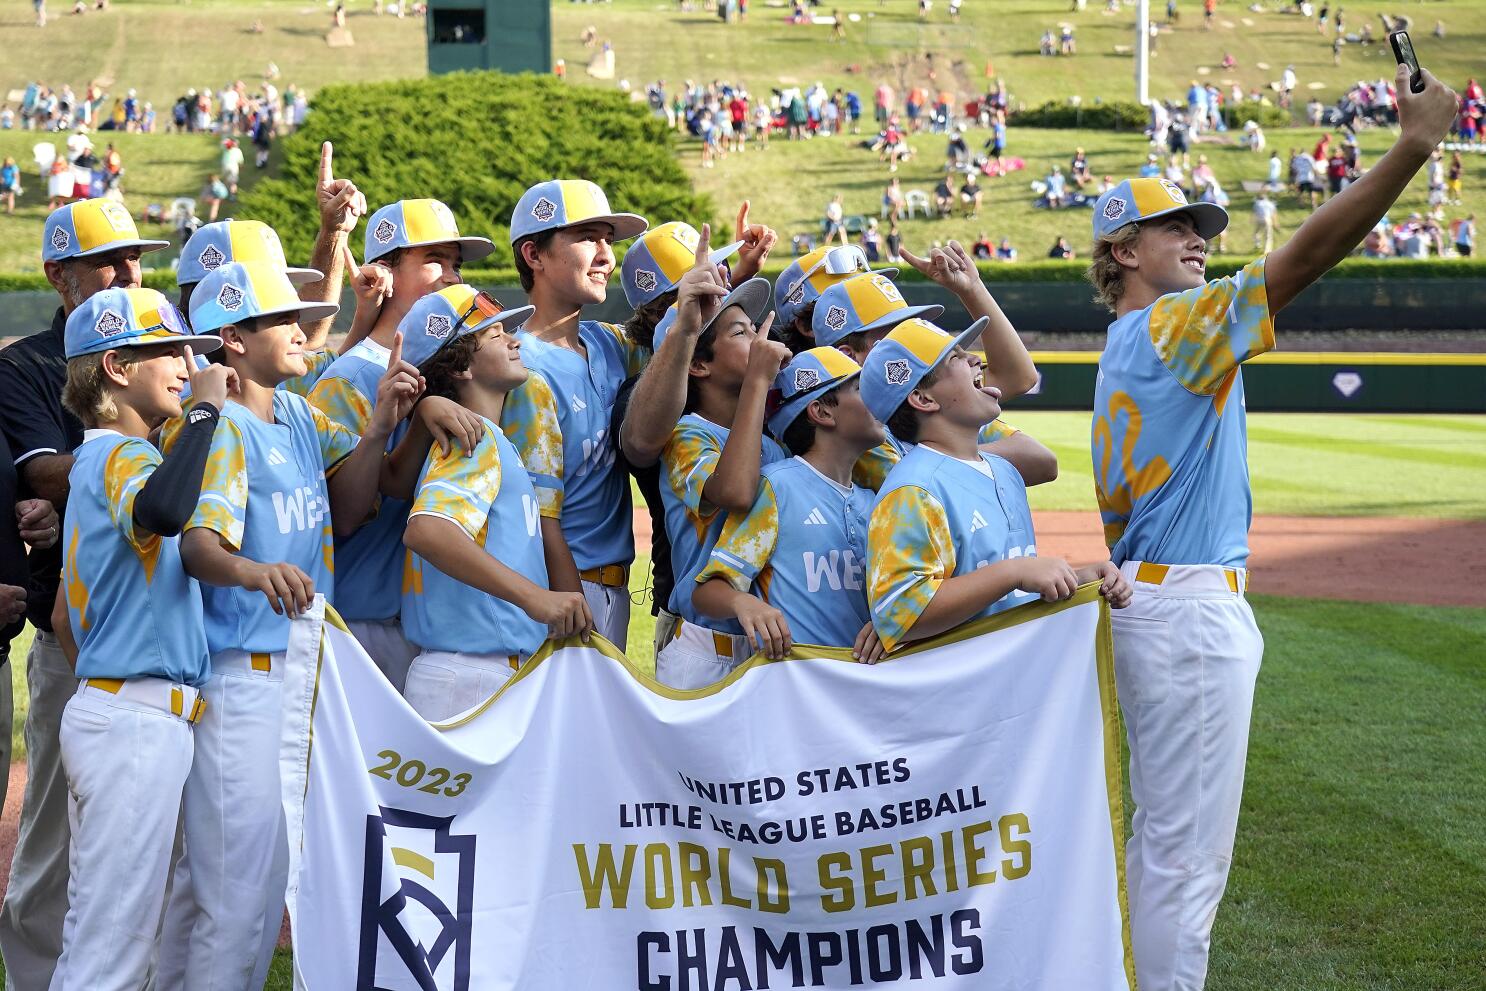 Little League World Series: Curacao and California to square off